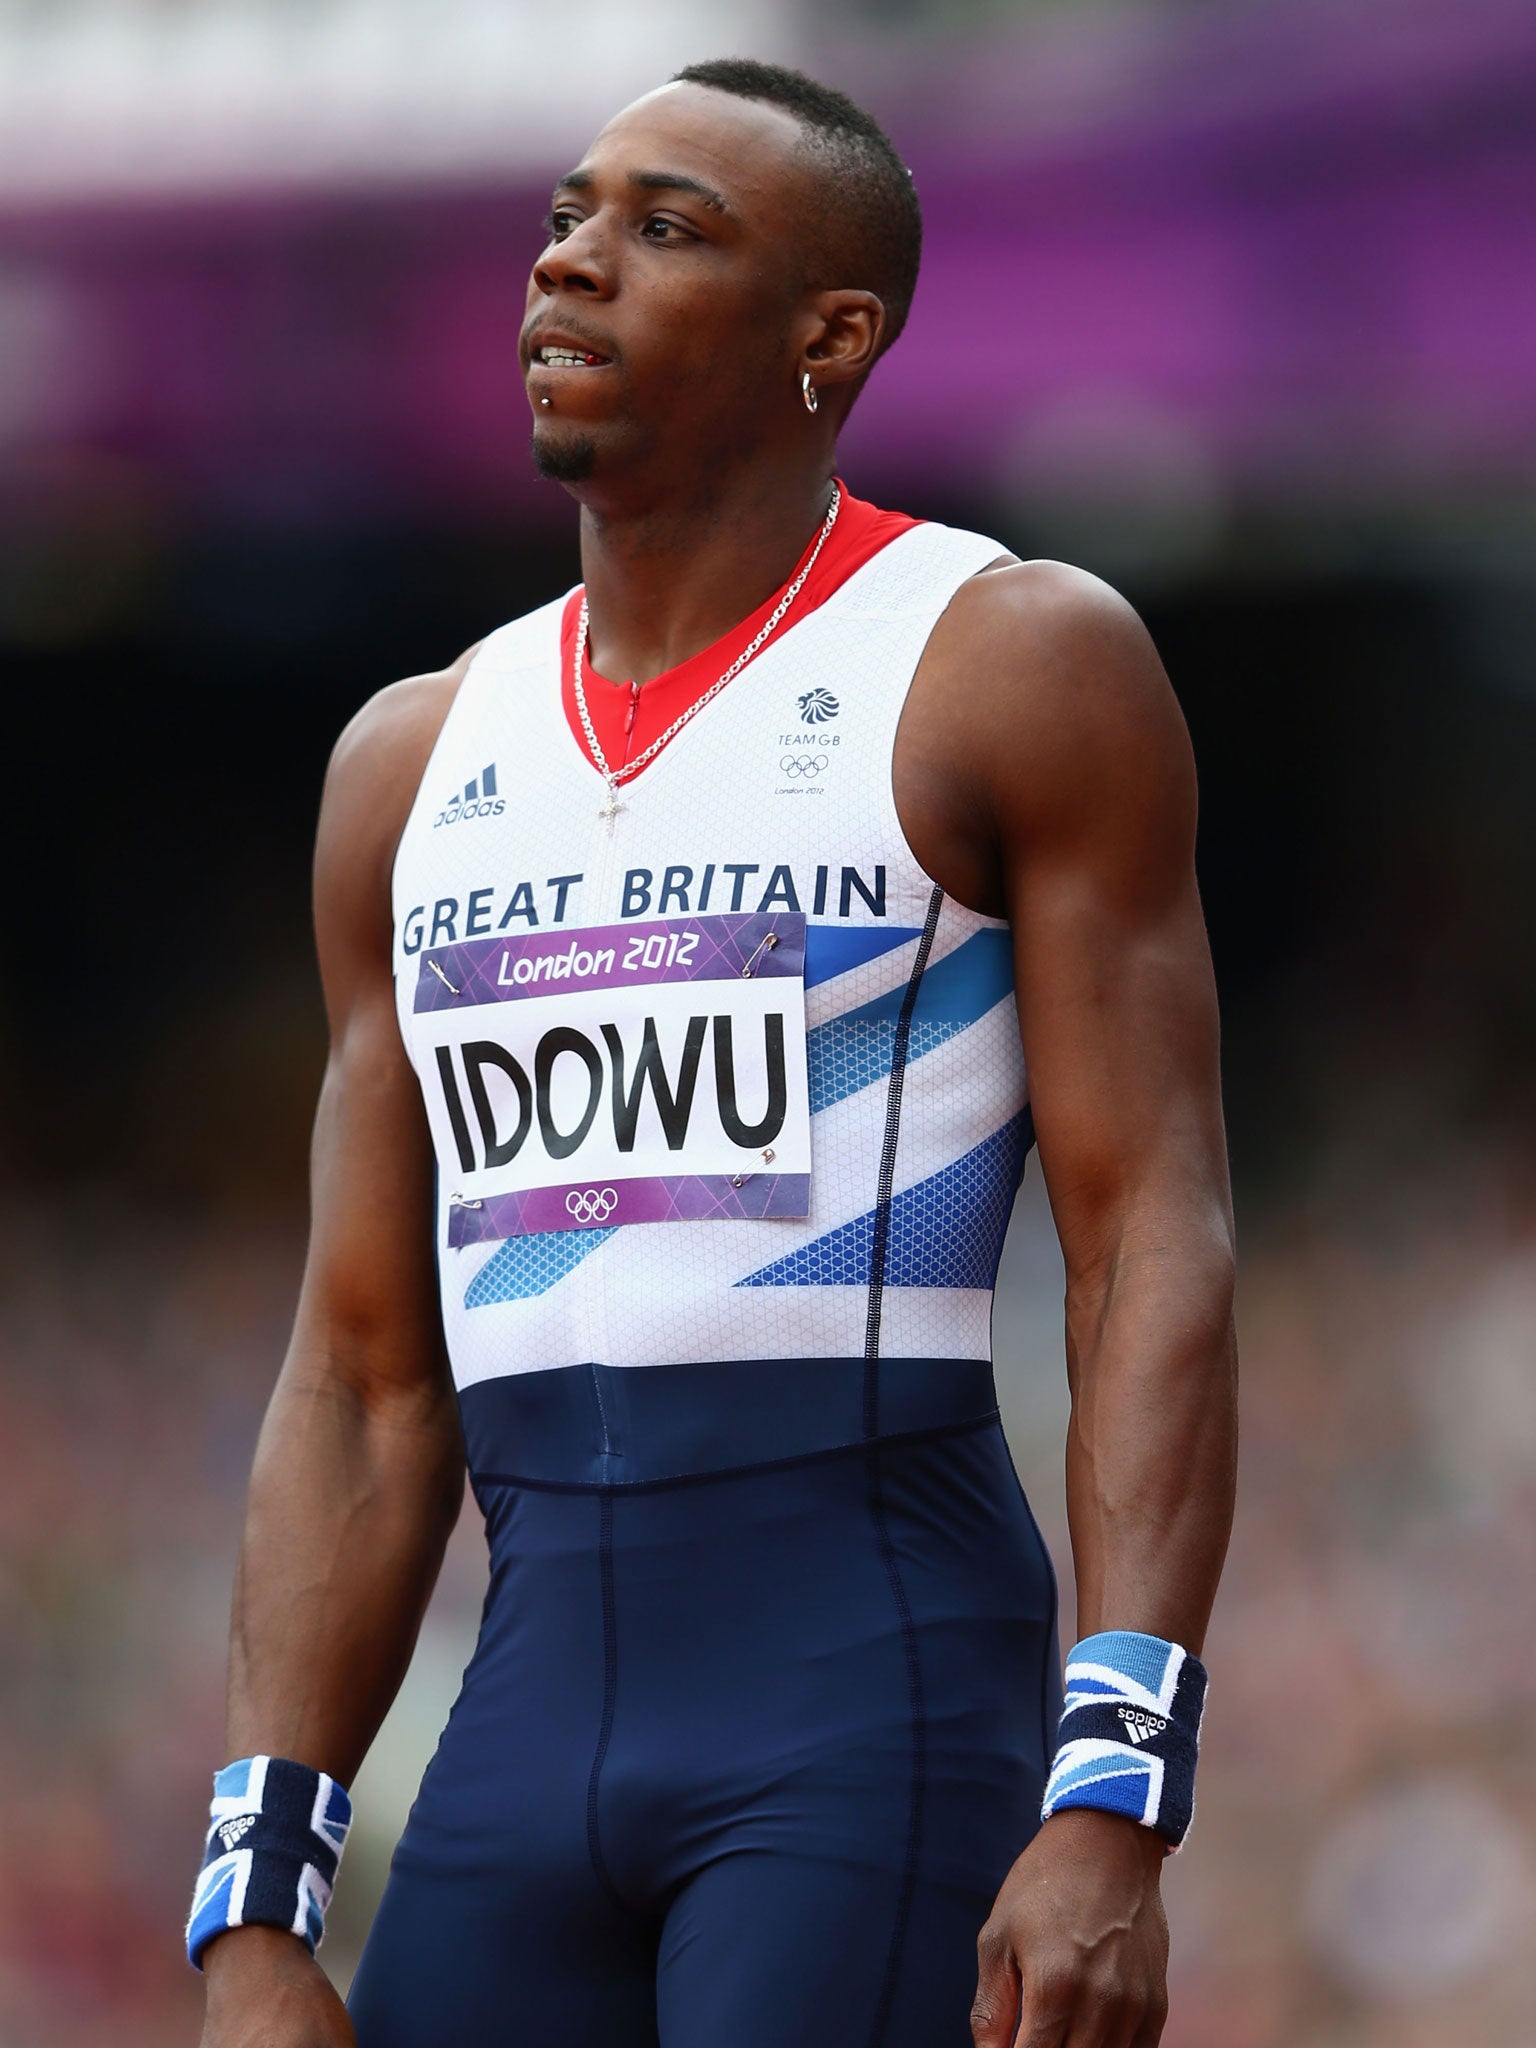 Idowu, pictured here during the 2012 London Olympics, has been banned from driving and ordered to do community service